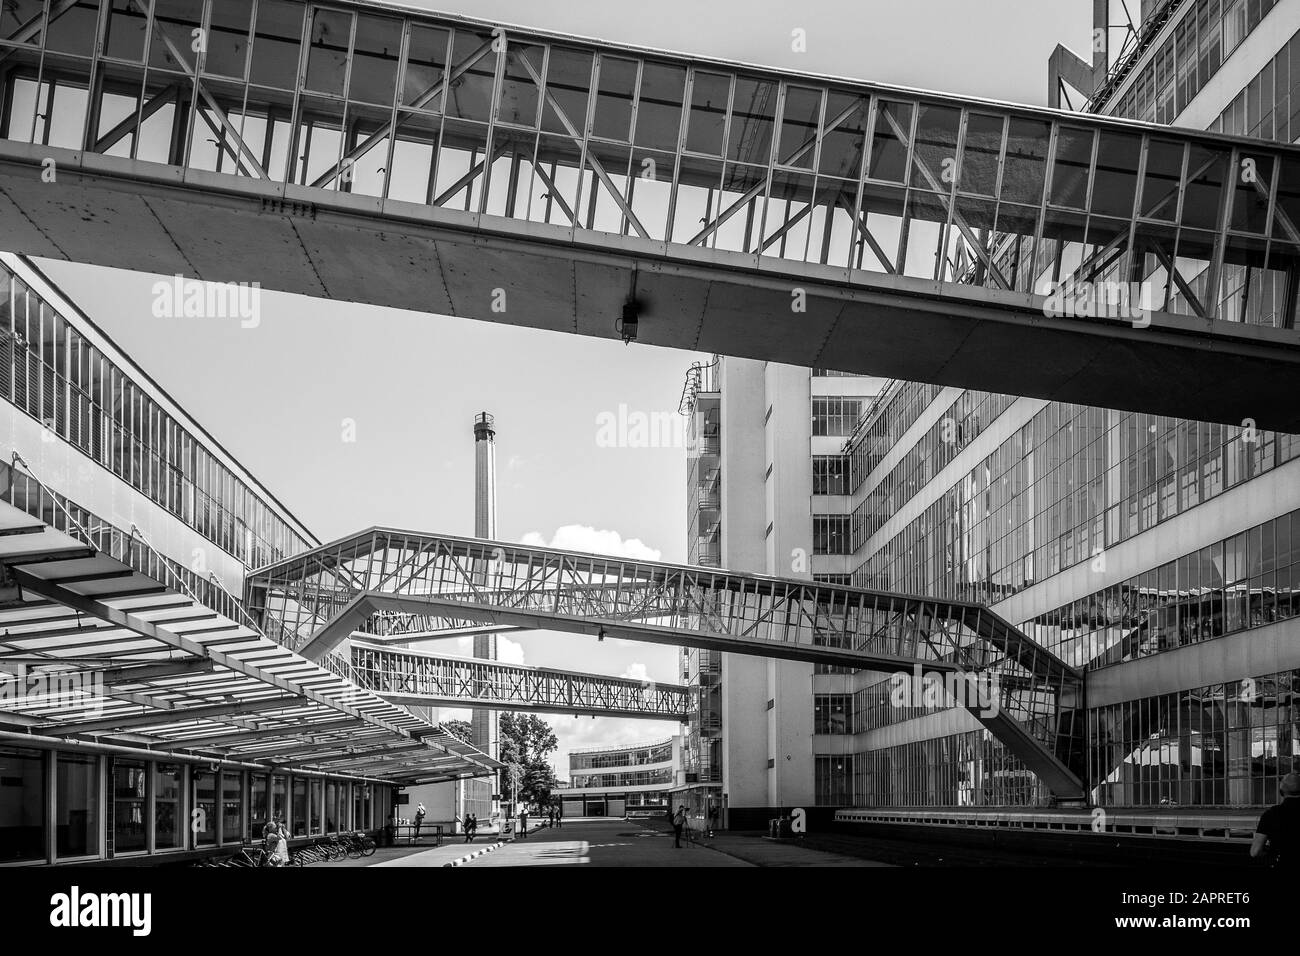 Closeup shot of bridges connecting several modern buildings to each other Stock Photo